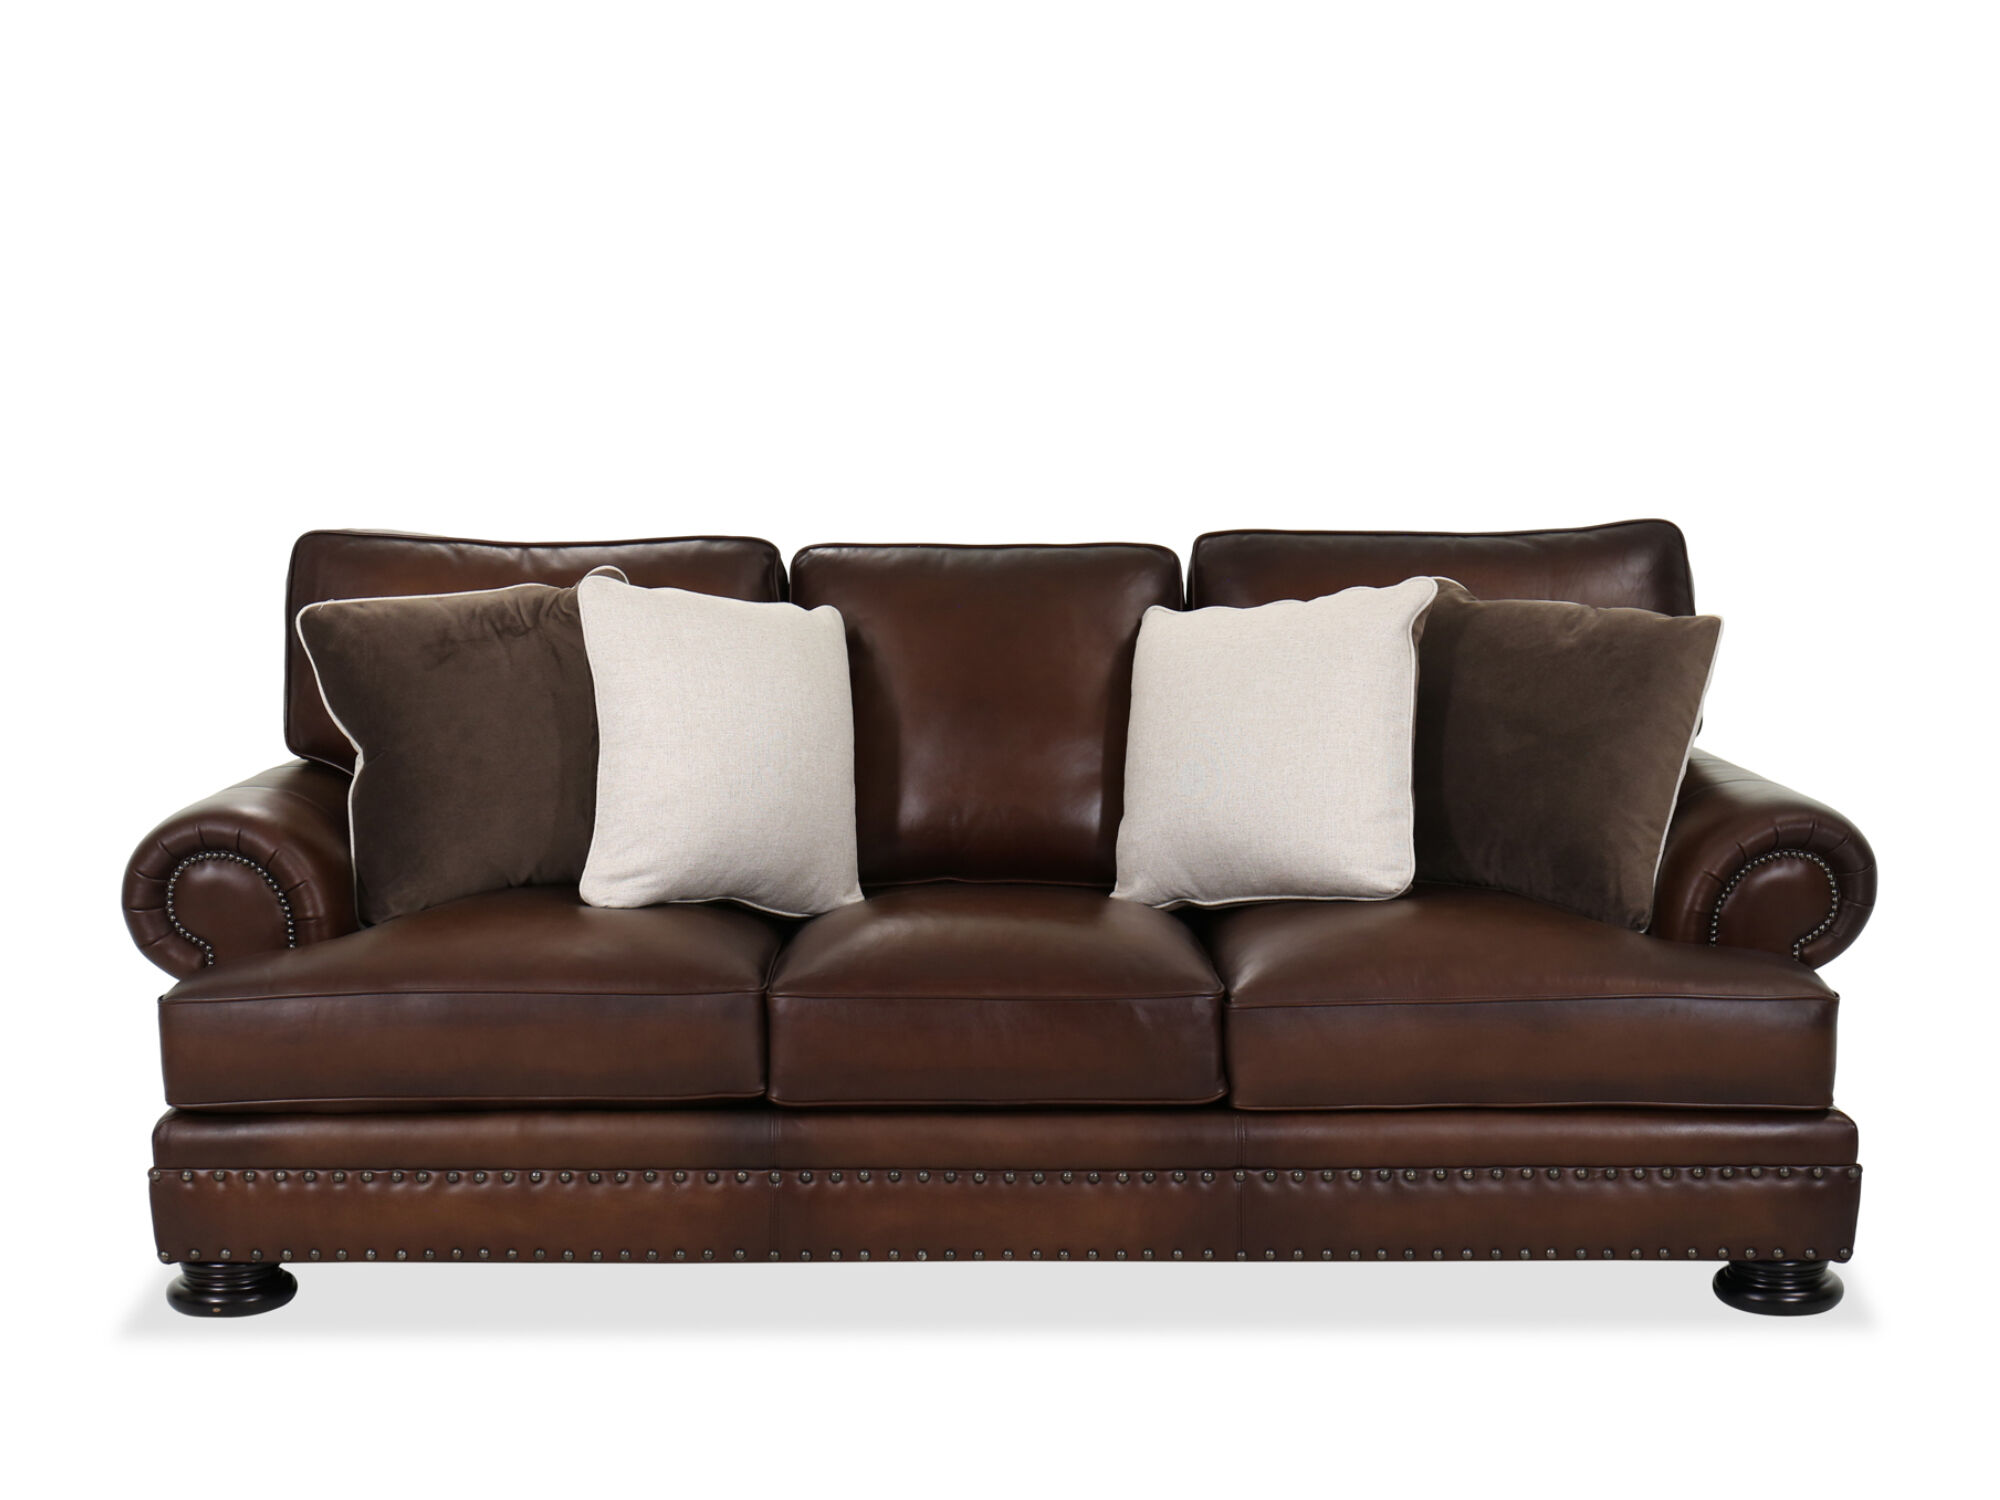 Leather 98 Sofa In Brown Mathis, Bernhardt Leather Couch